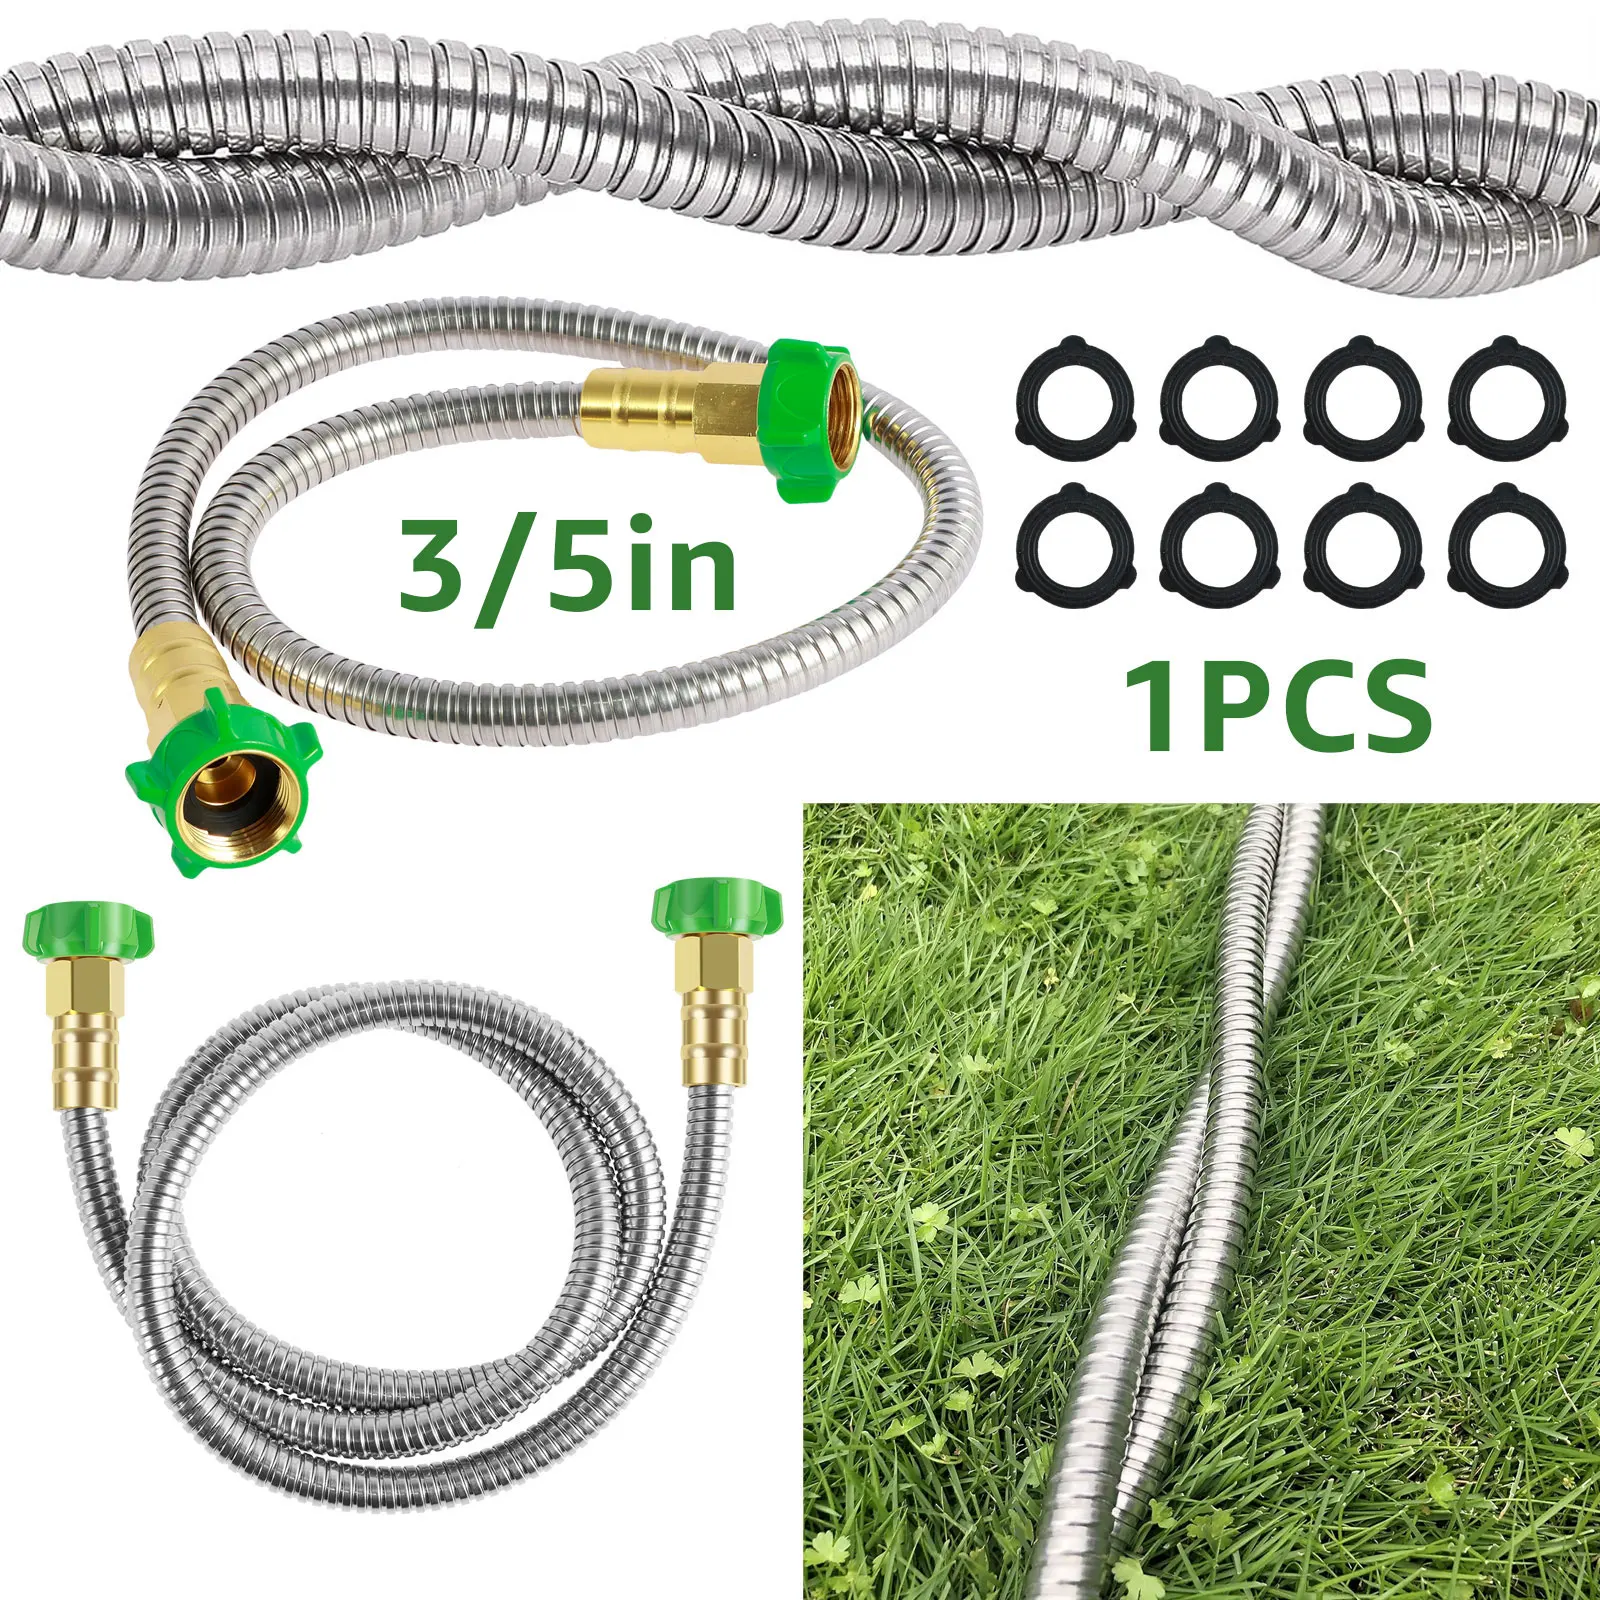 

Short Garden Hose 3FT 5FT US 304 Stainless Steel Garden Leader Hose with Female to Female Connector Leakproof Outdoor Flexible